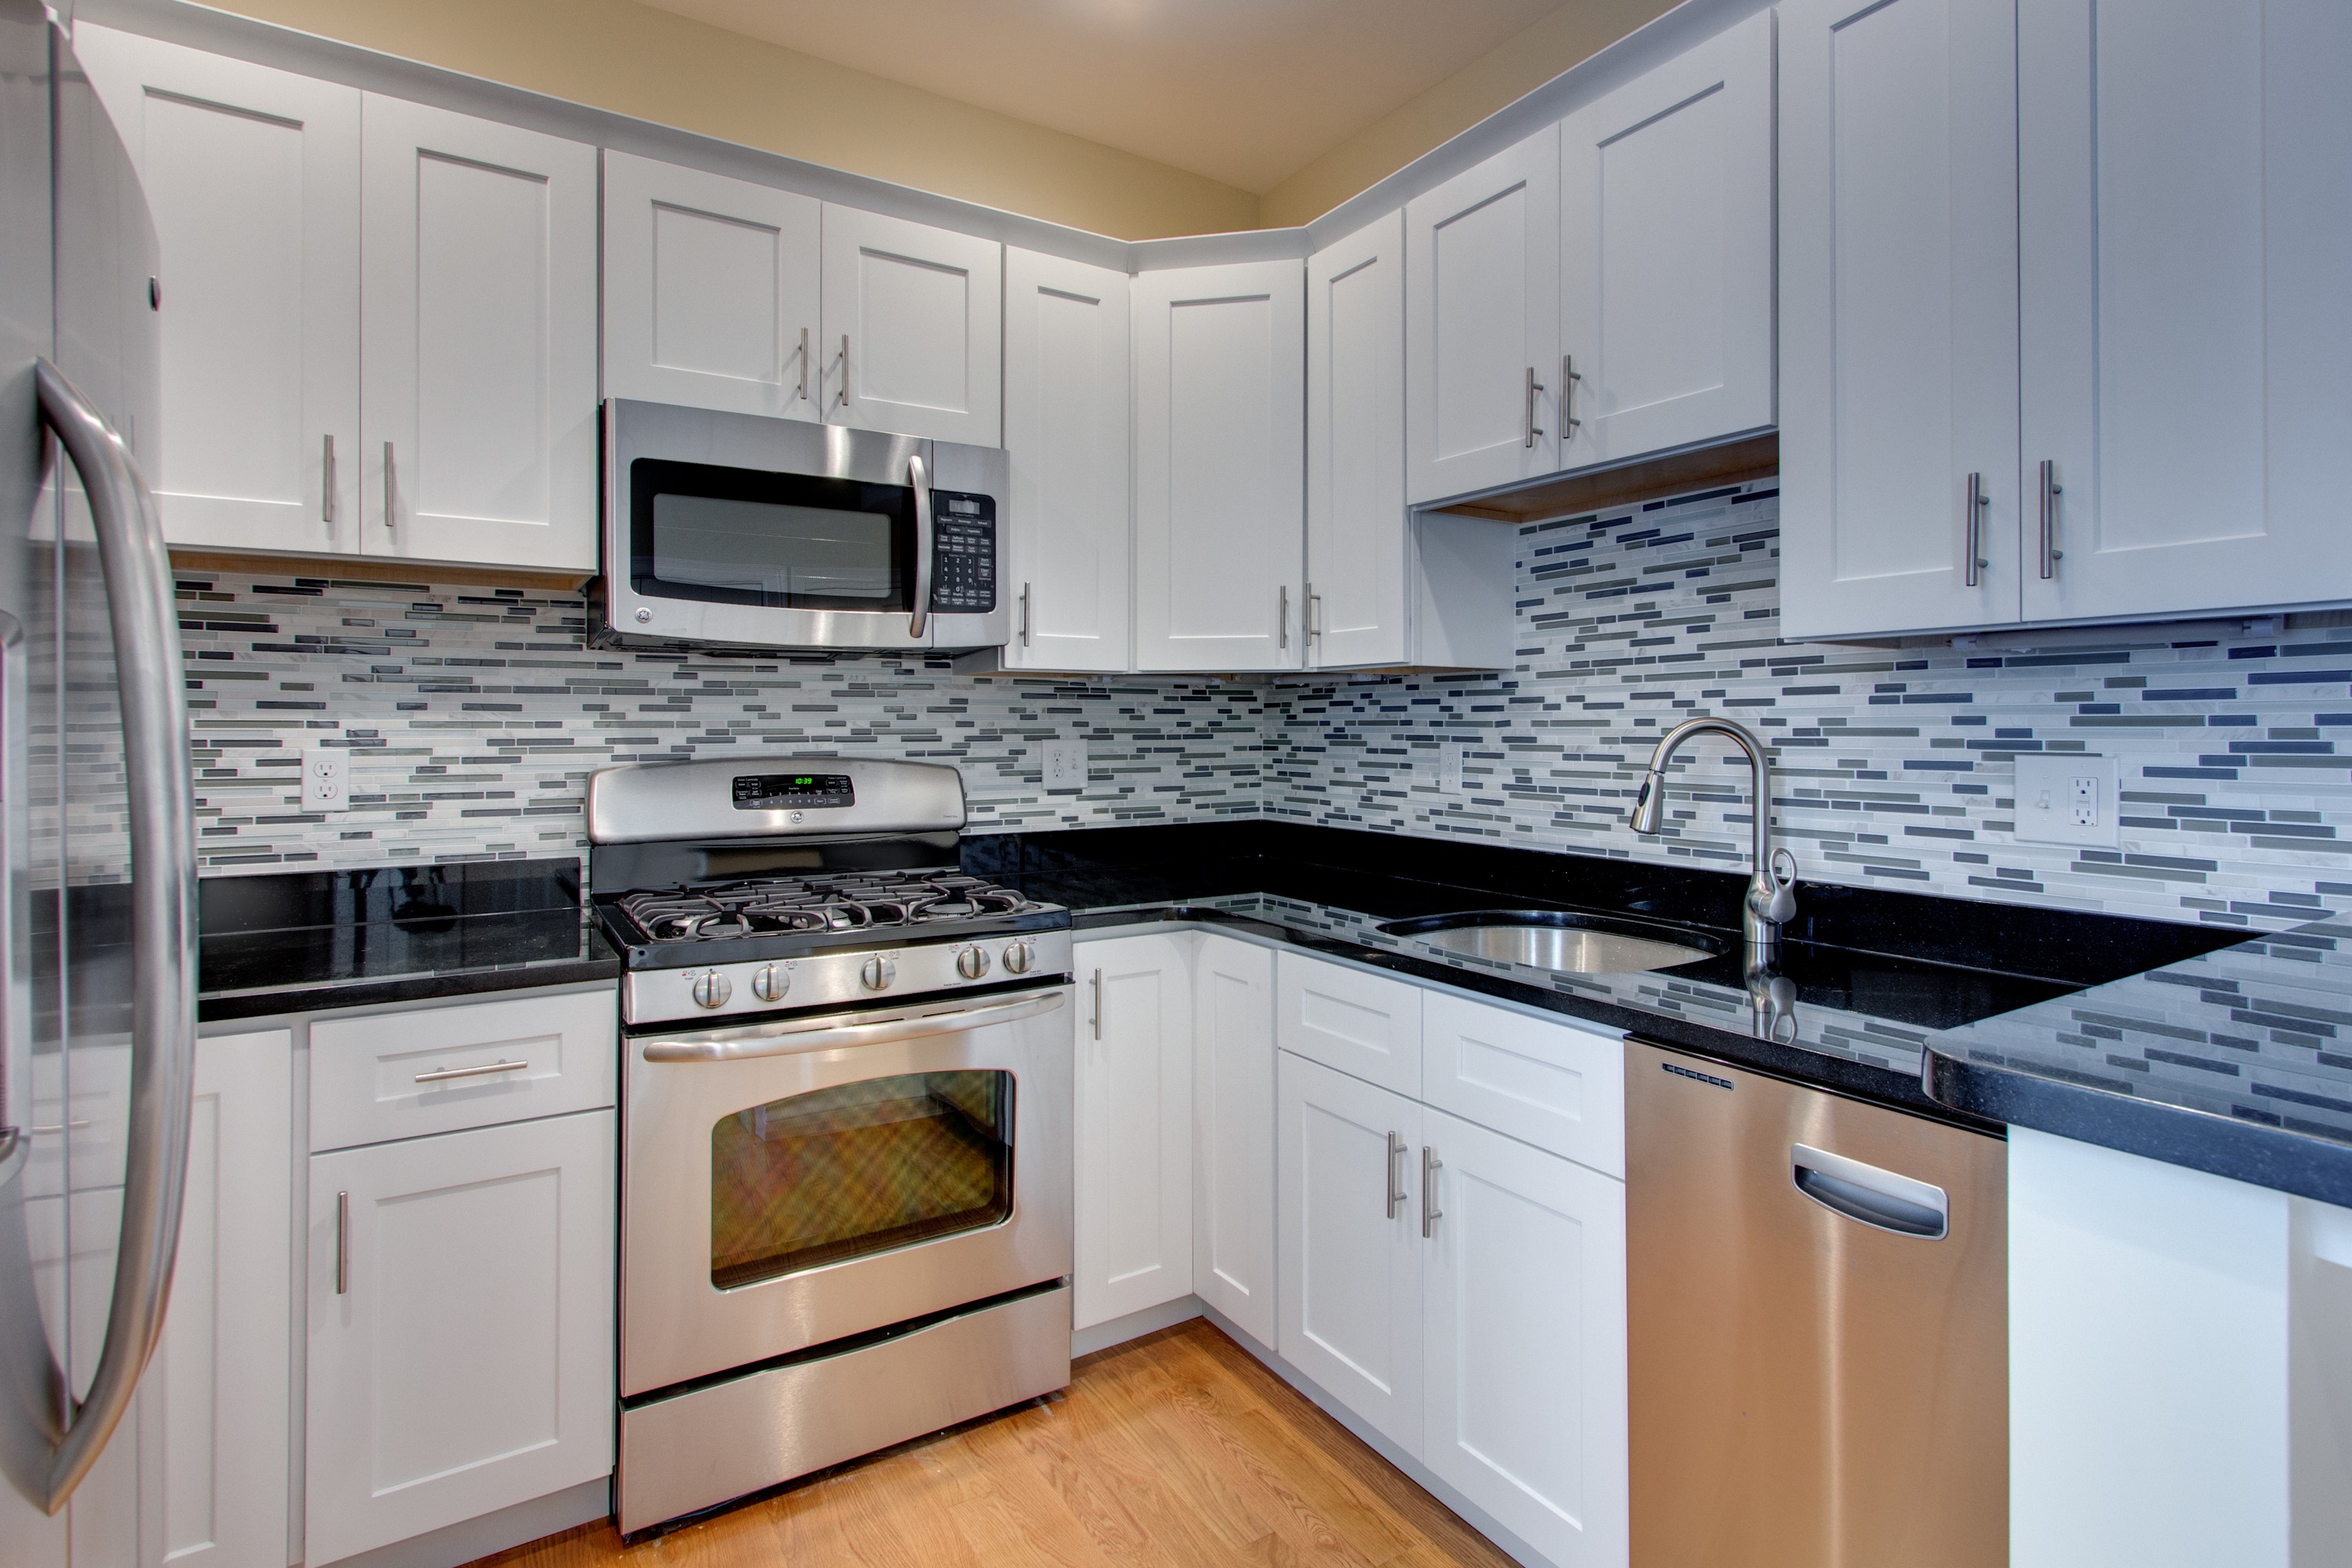 Kitchen with all stainless steel appliances: refrigerator, dishwasher, oven and microwave